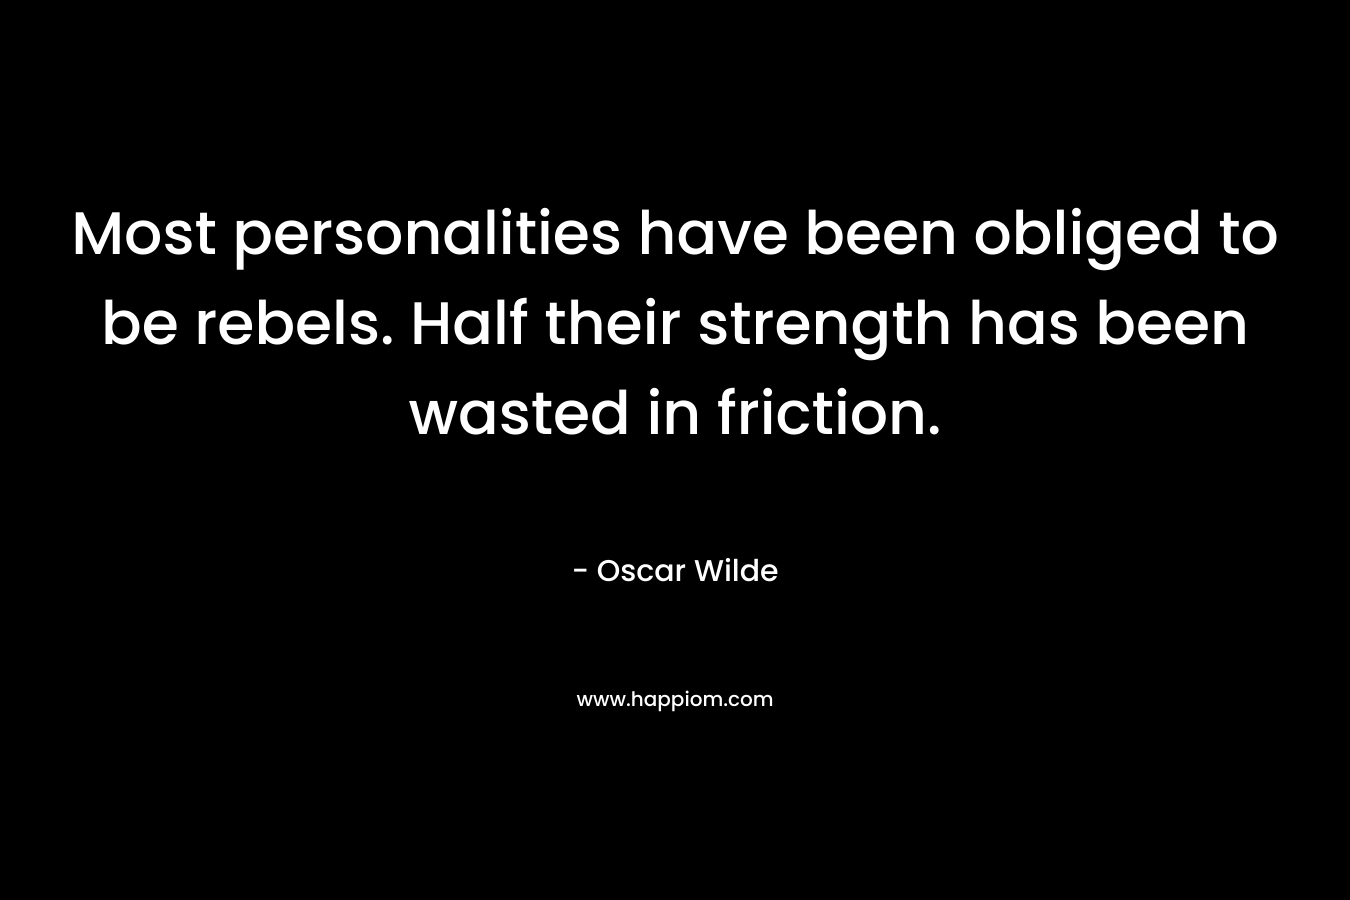 Most personalities have been obliged to be rebels. Half their strength has been wasted in friction. – Oscar Wilde